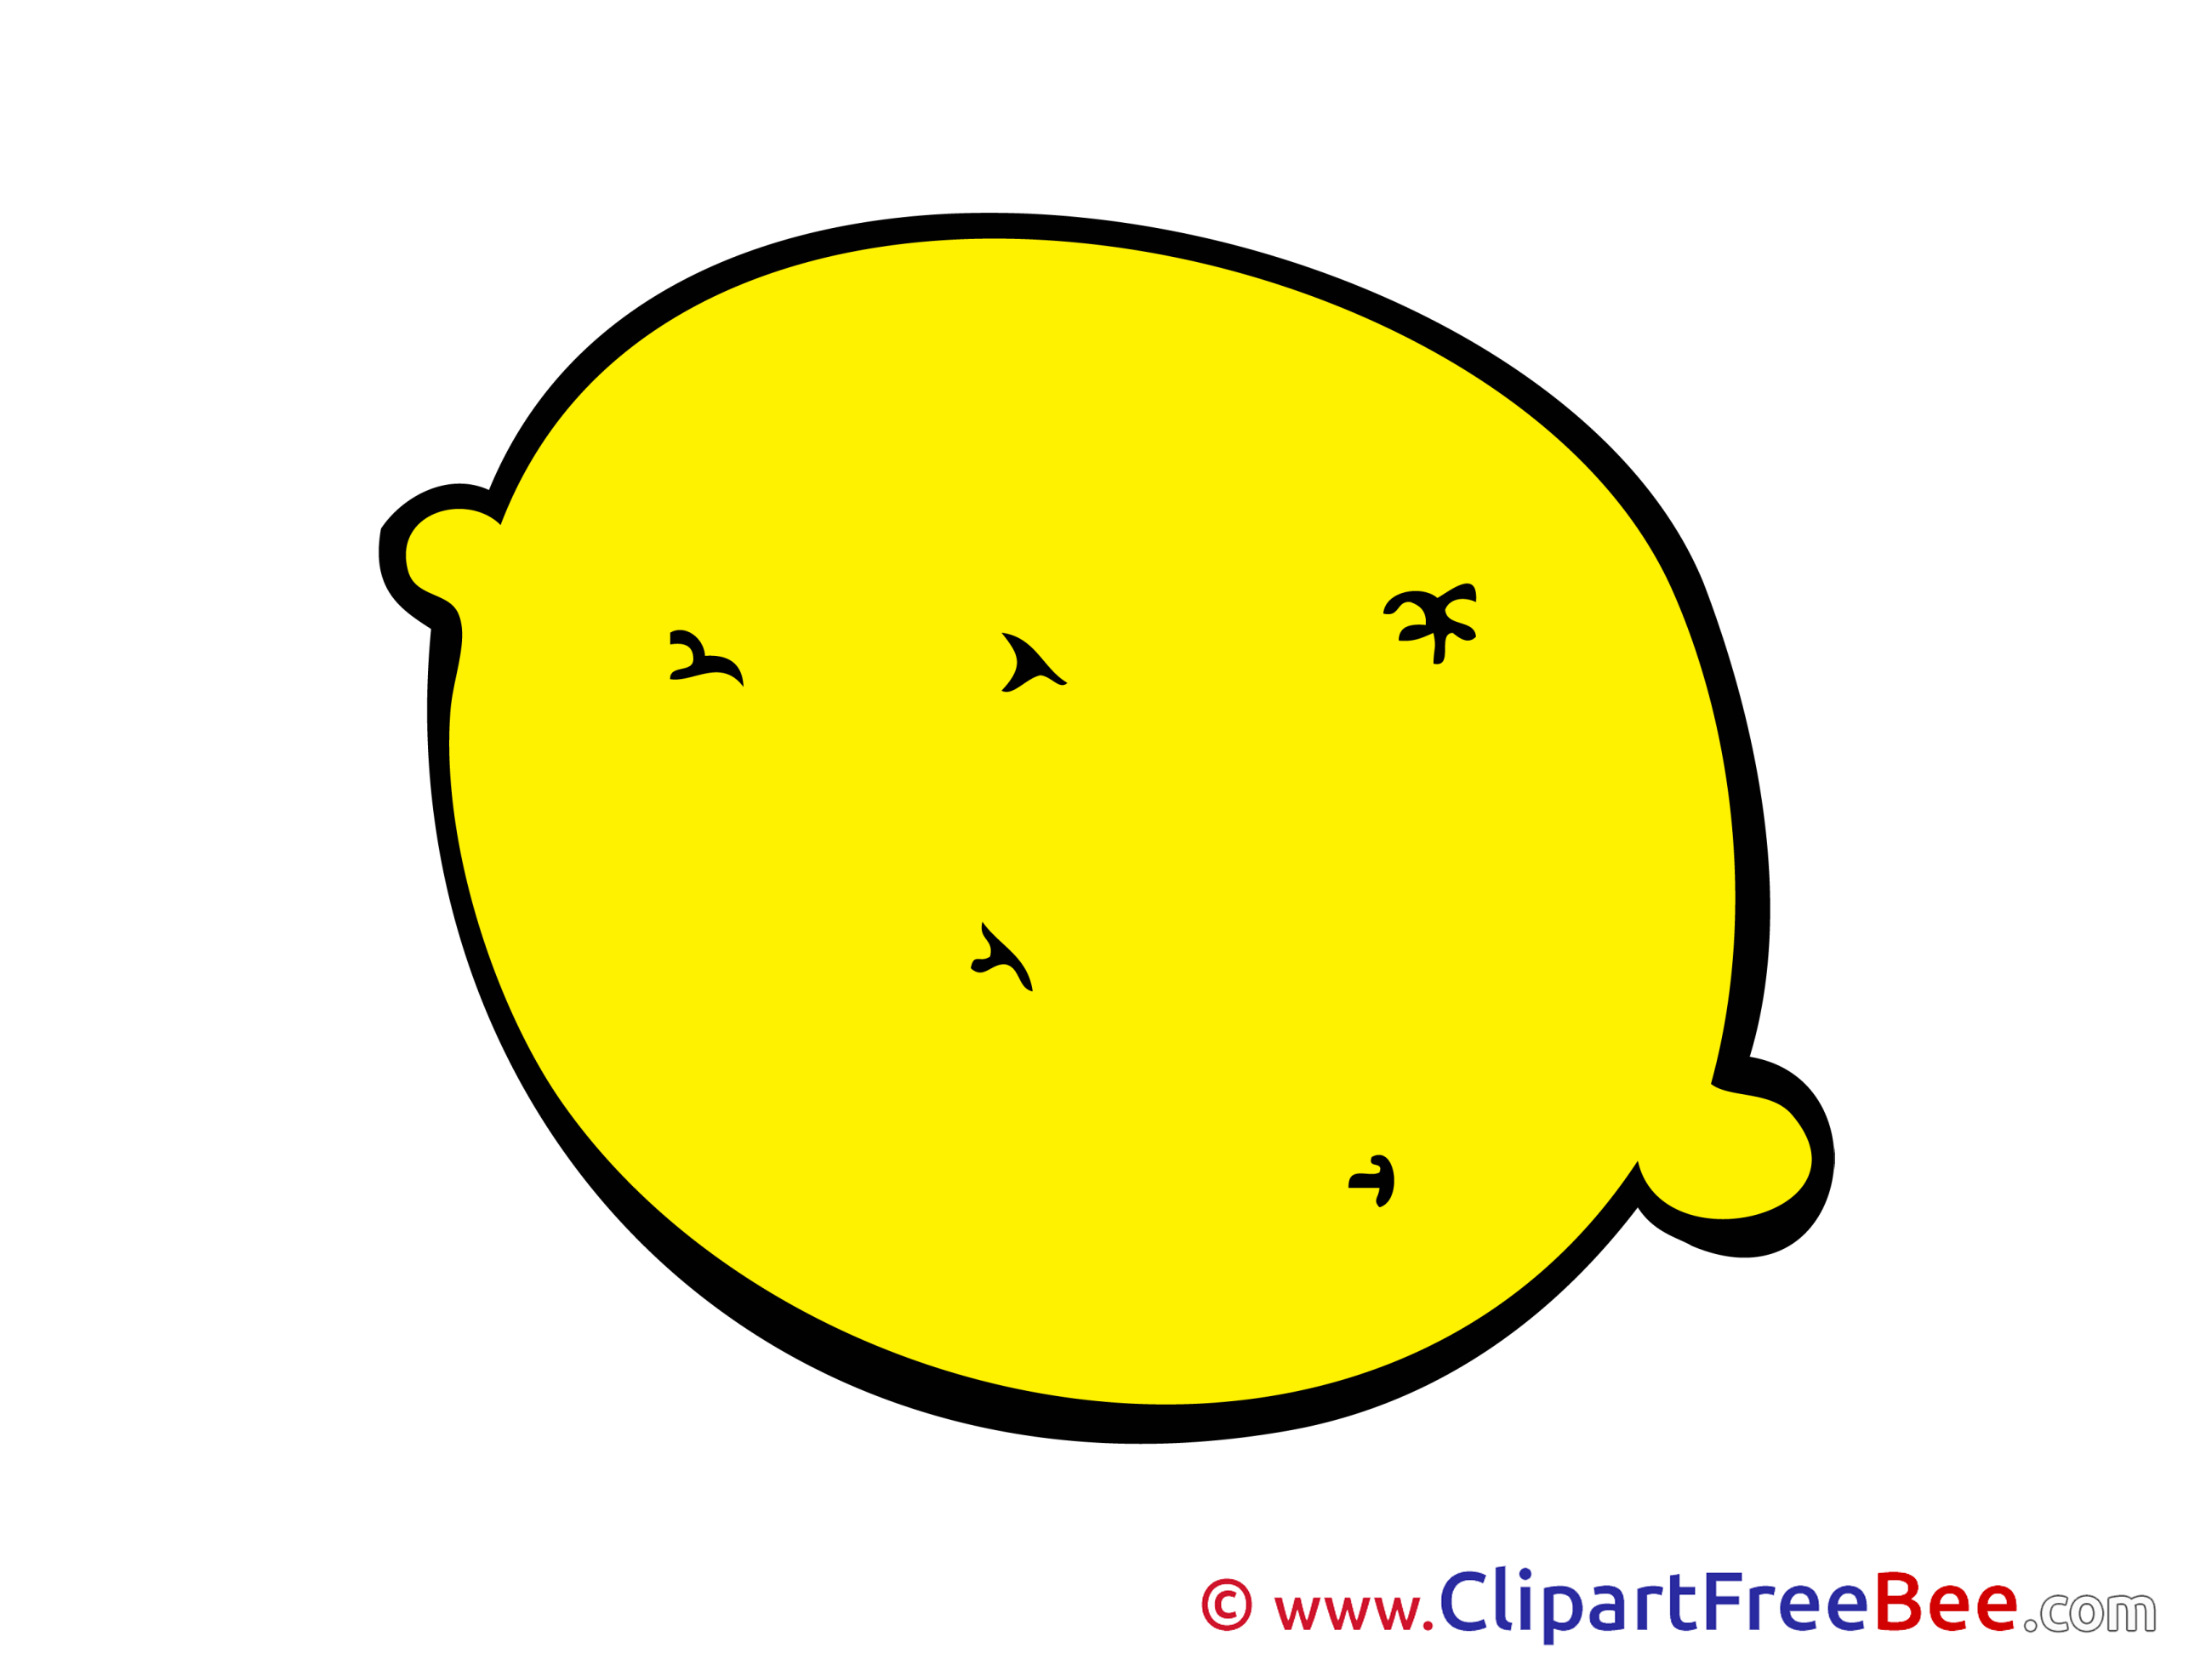 Lemon free printable Cliparts and Images